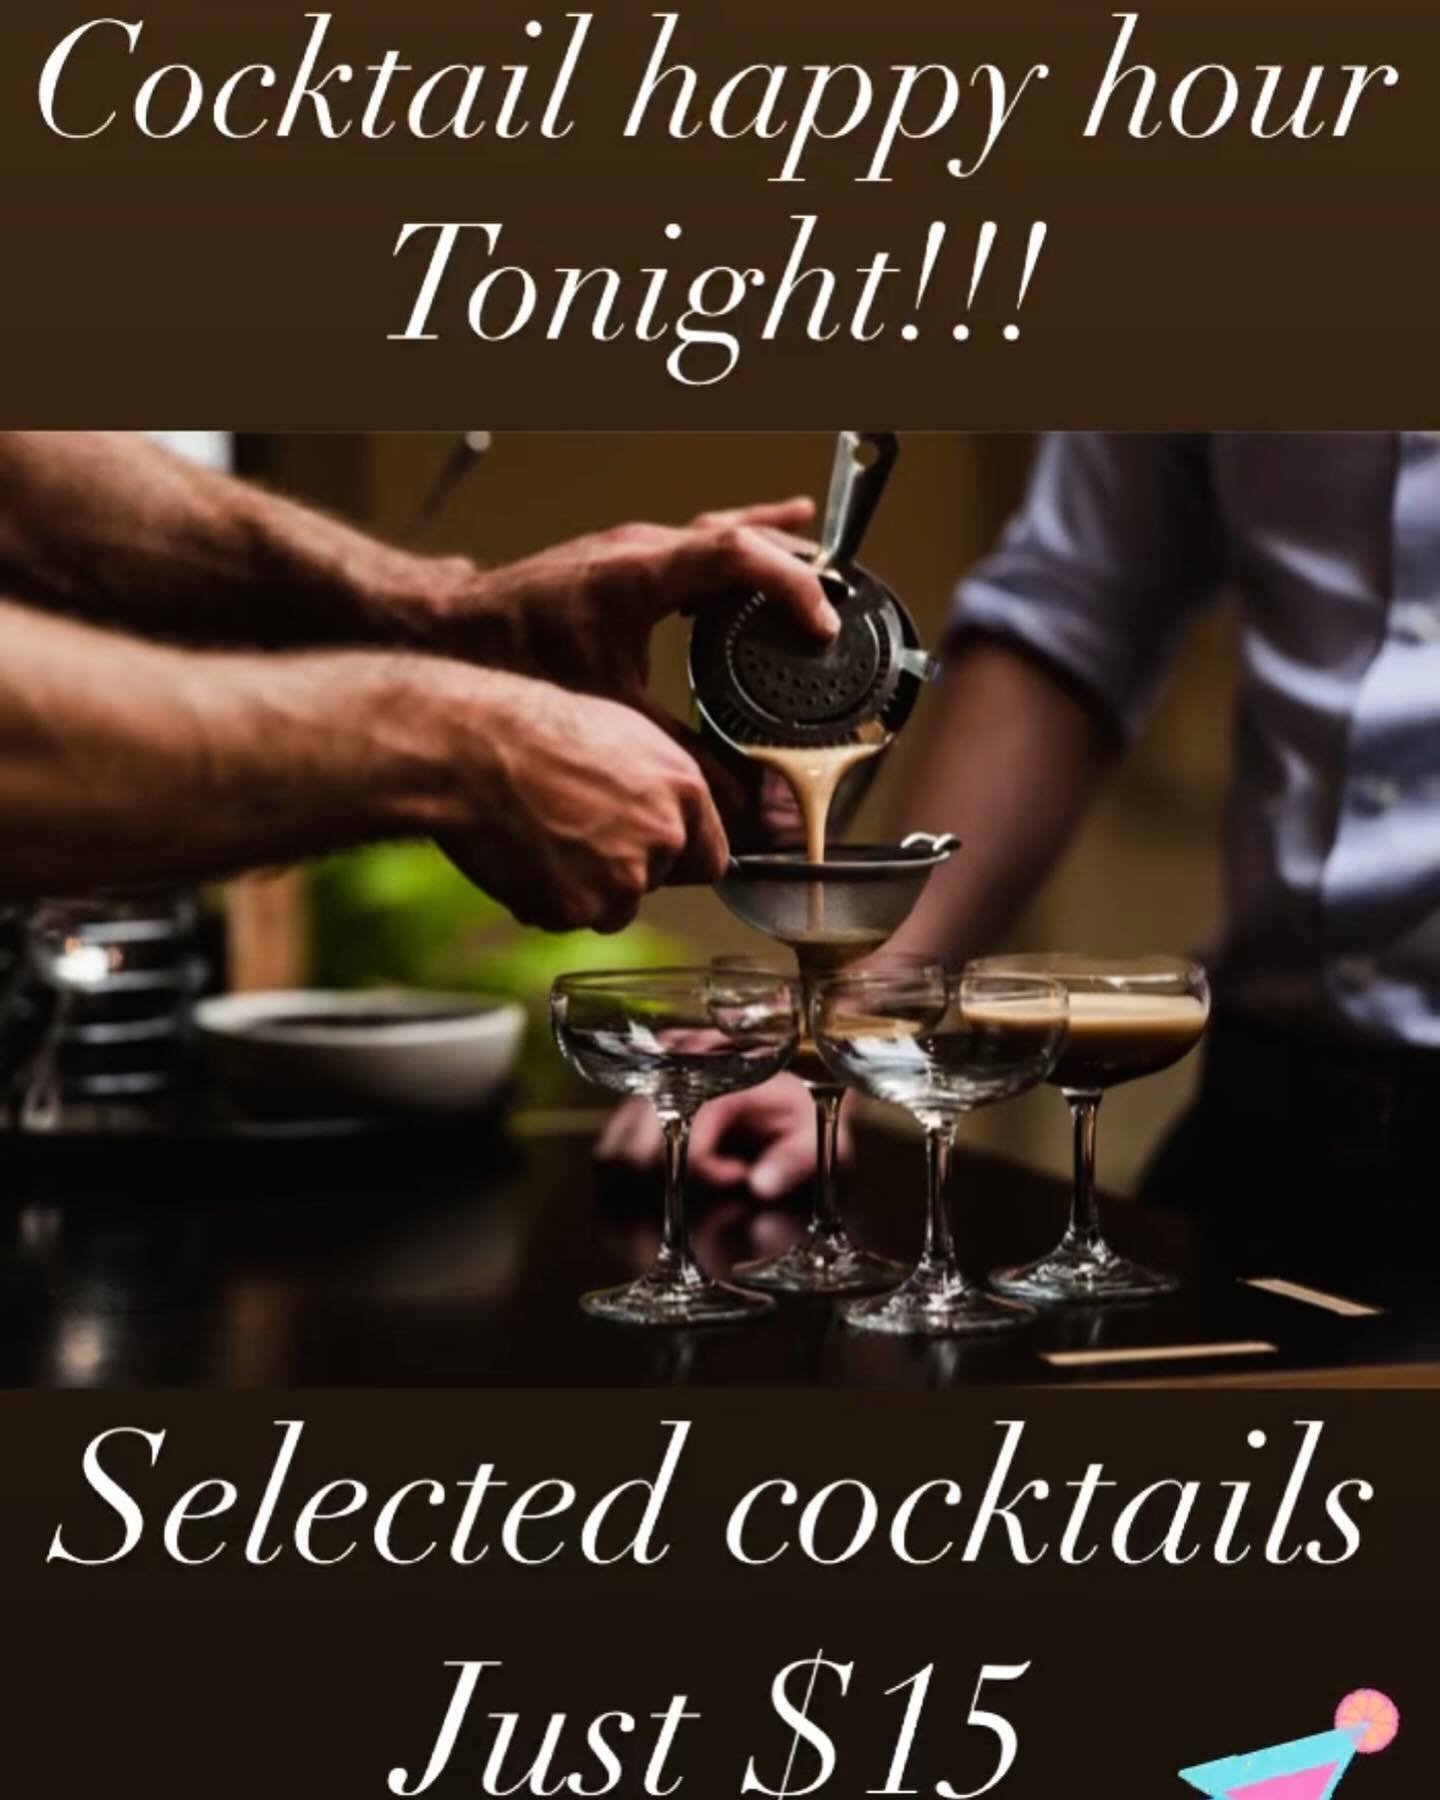 Let&rsquo;s start the #Easter long weekend in style with #cocktailhappyhour Thursday 28th from 6 to 8pm!
Selected #cocktails for $15 
#aperolspritz #espressomartini #spicymargarita 

@whatsonadelaide @experienceadl @adelaideloves @thestreetsofadelaid